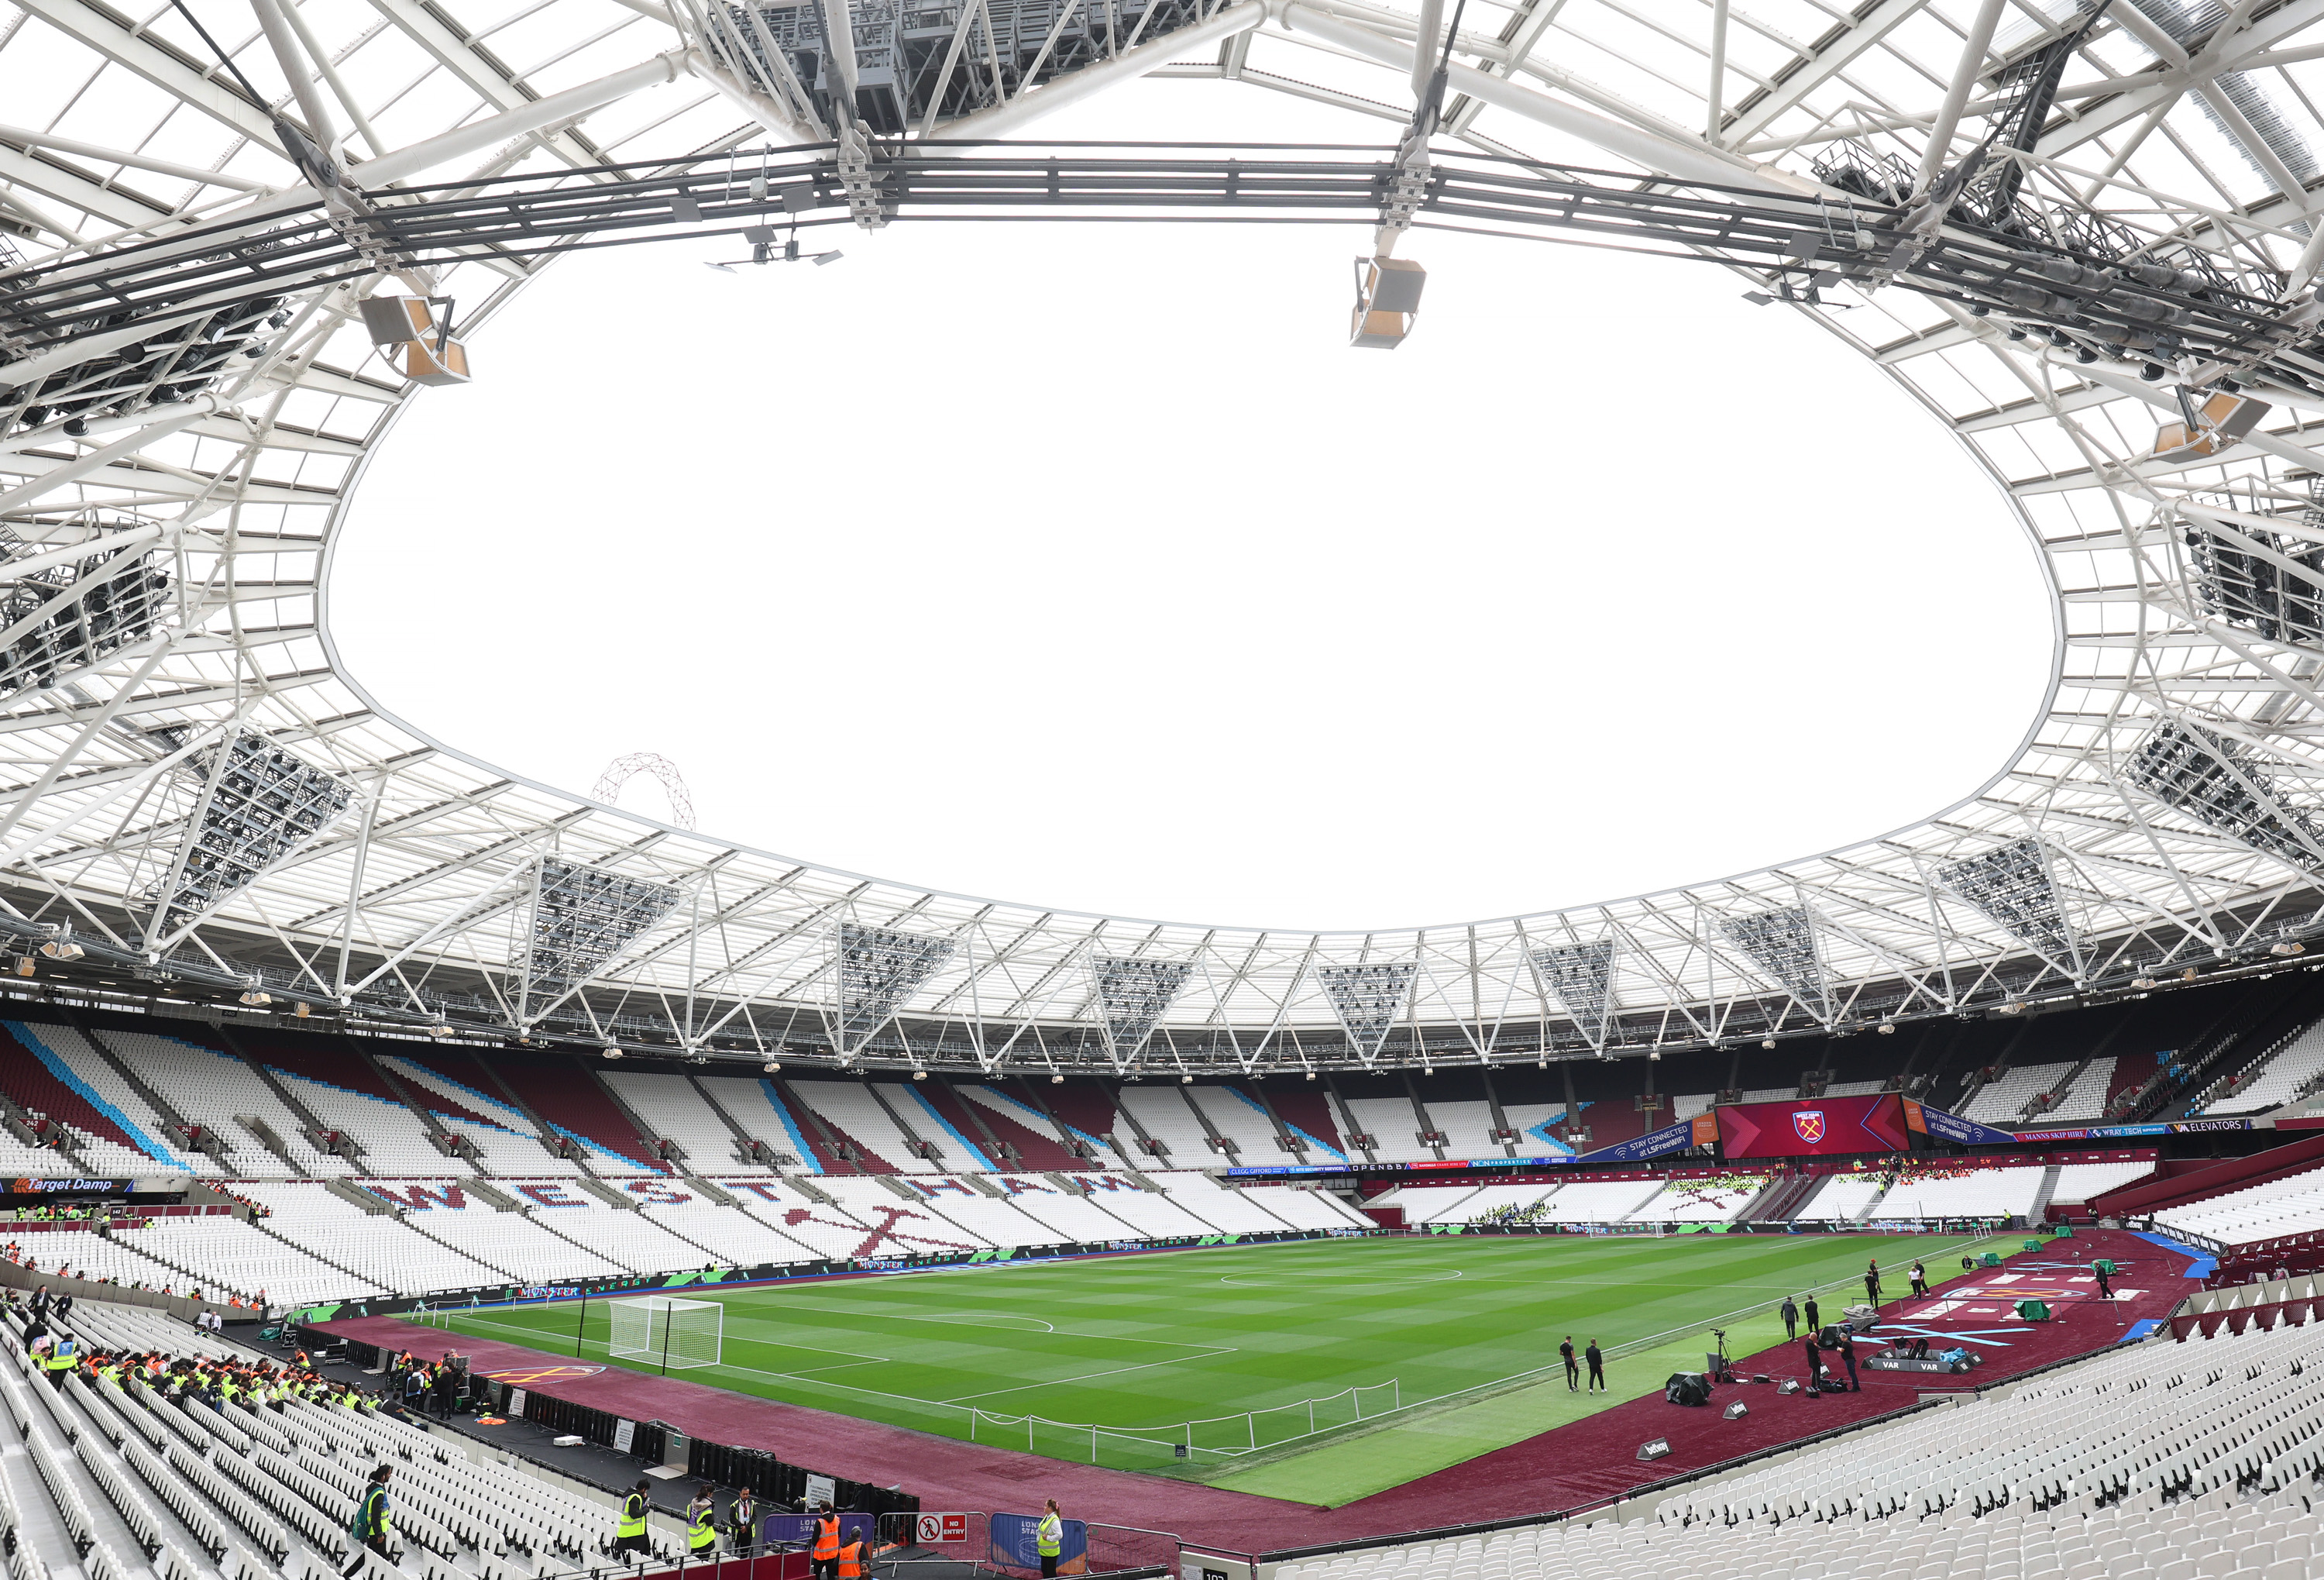 West Ham moved to the London Stadium in 2016